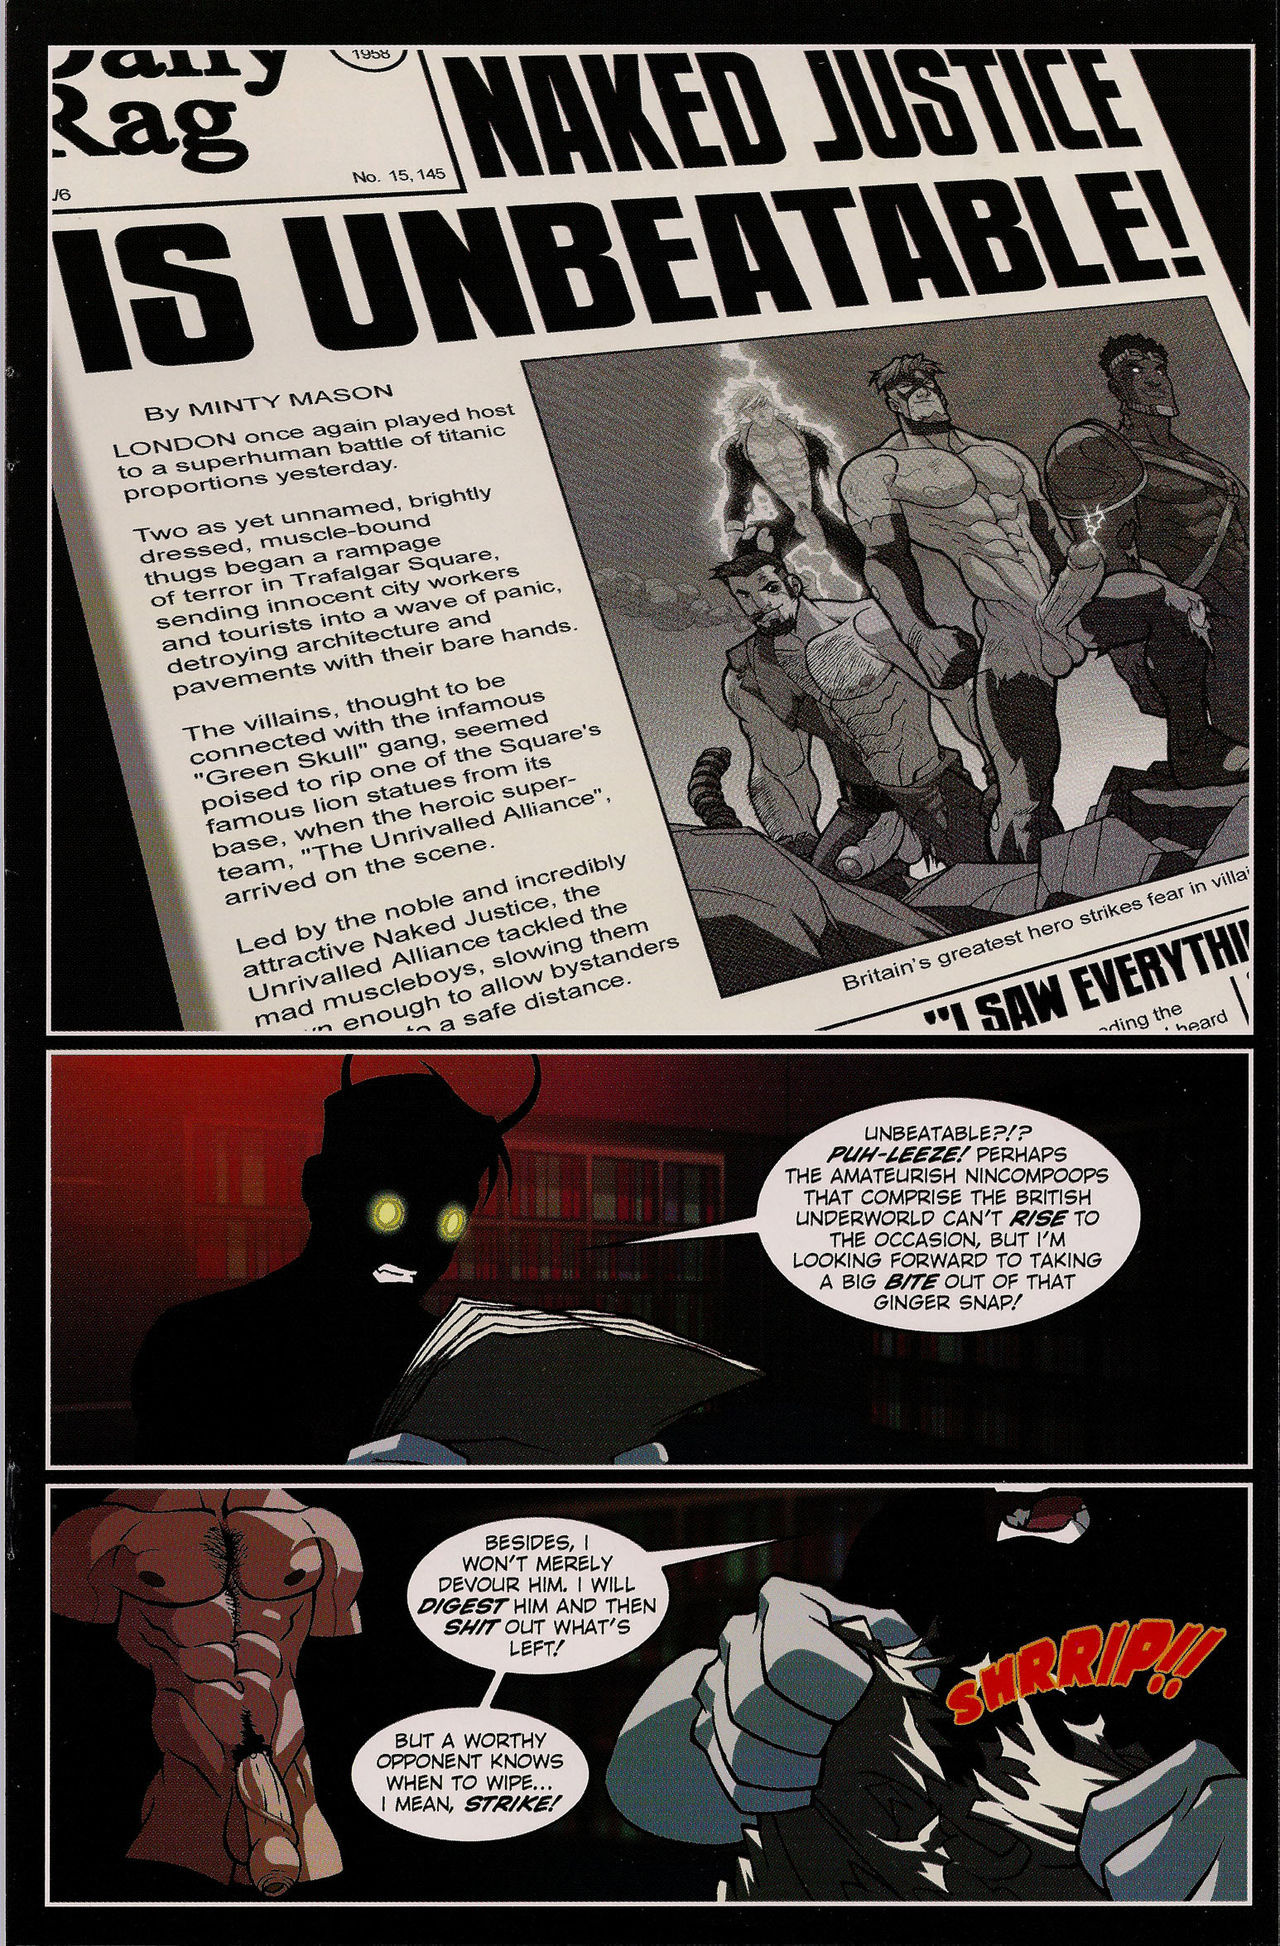 Naked Justice Beginnings 2 (Patrick Fillion) page 3